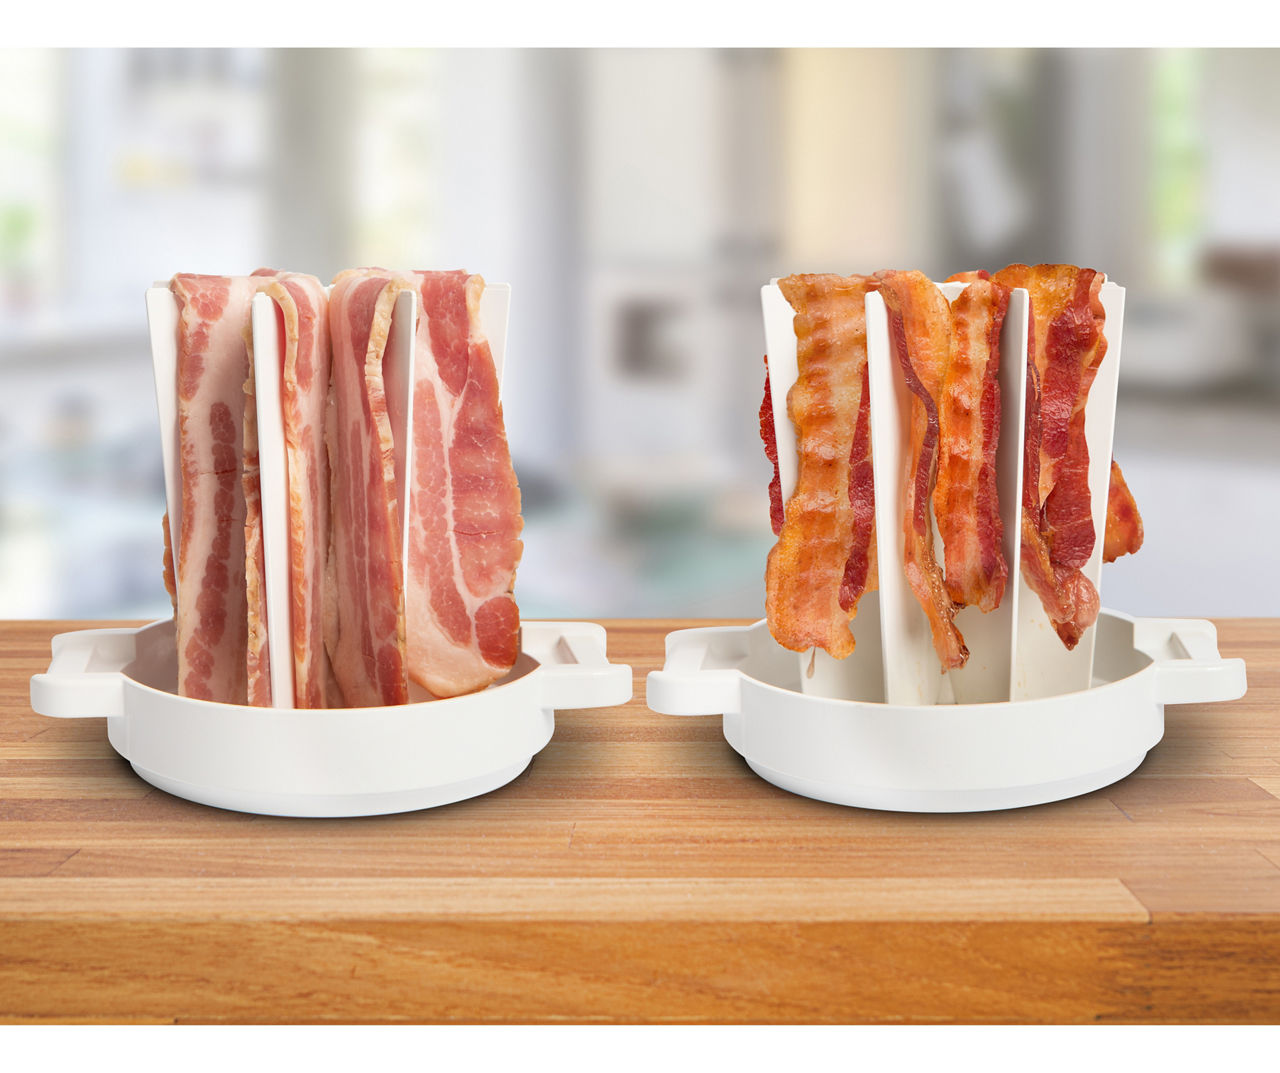 Microwave Bacon Tray with Splatter Lid, Safety, Quick and with No Mess